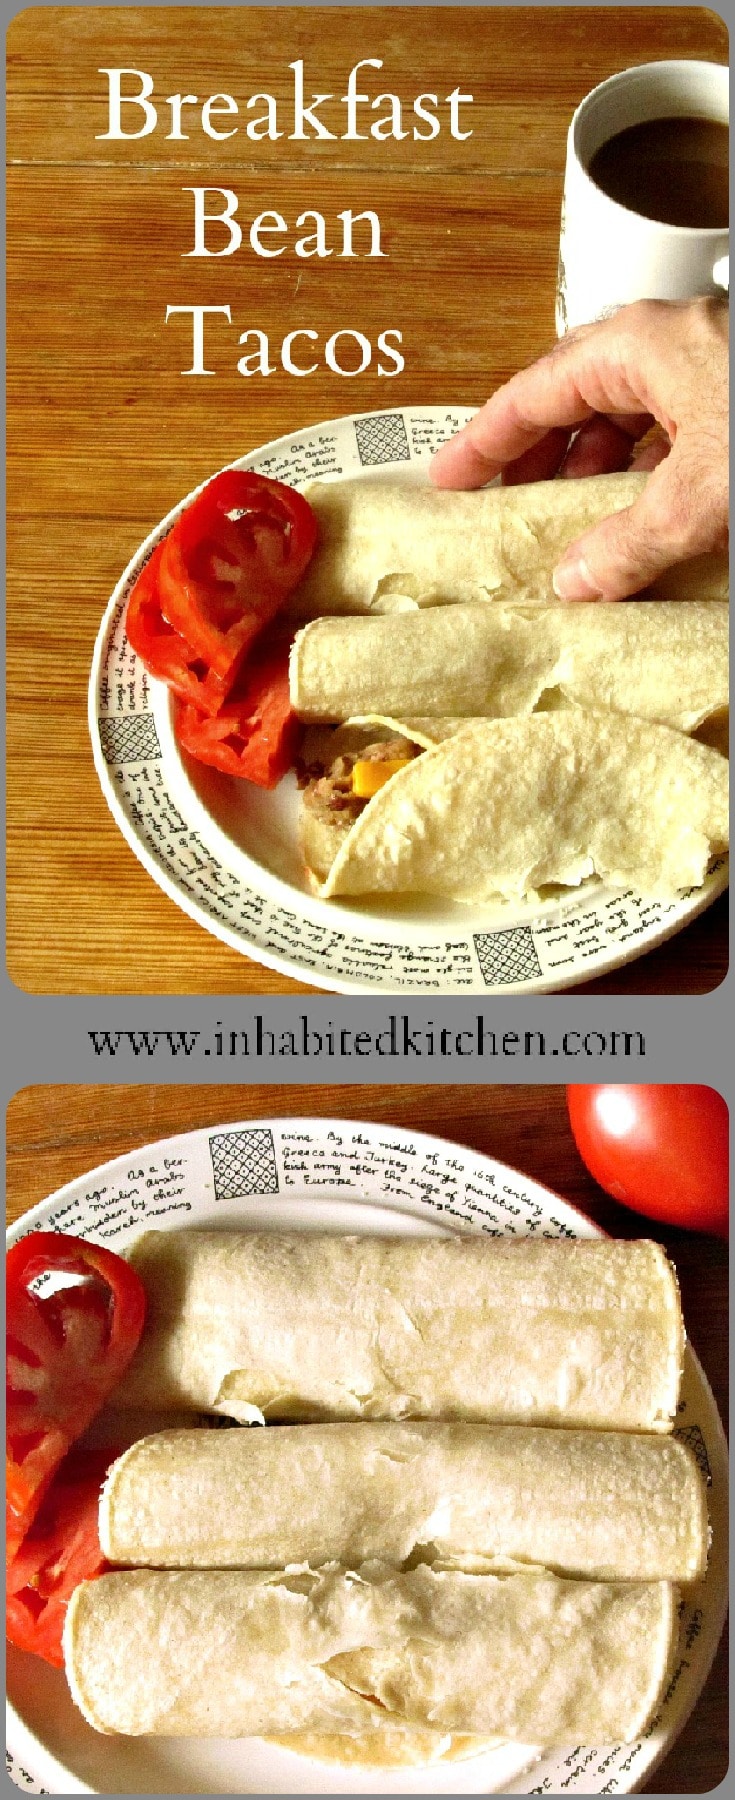 Corn tortillas, seasoned beans, and cheese all come together in Breakfast Bean Tacos, a quick and easy, gluten free breakfast!